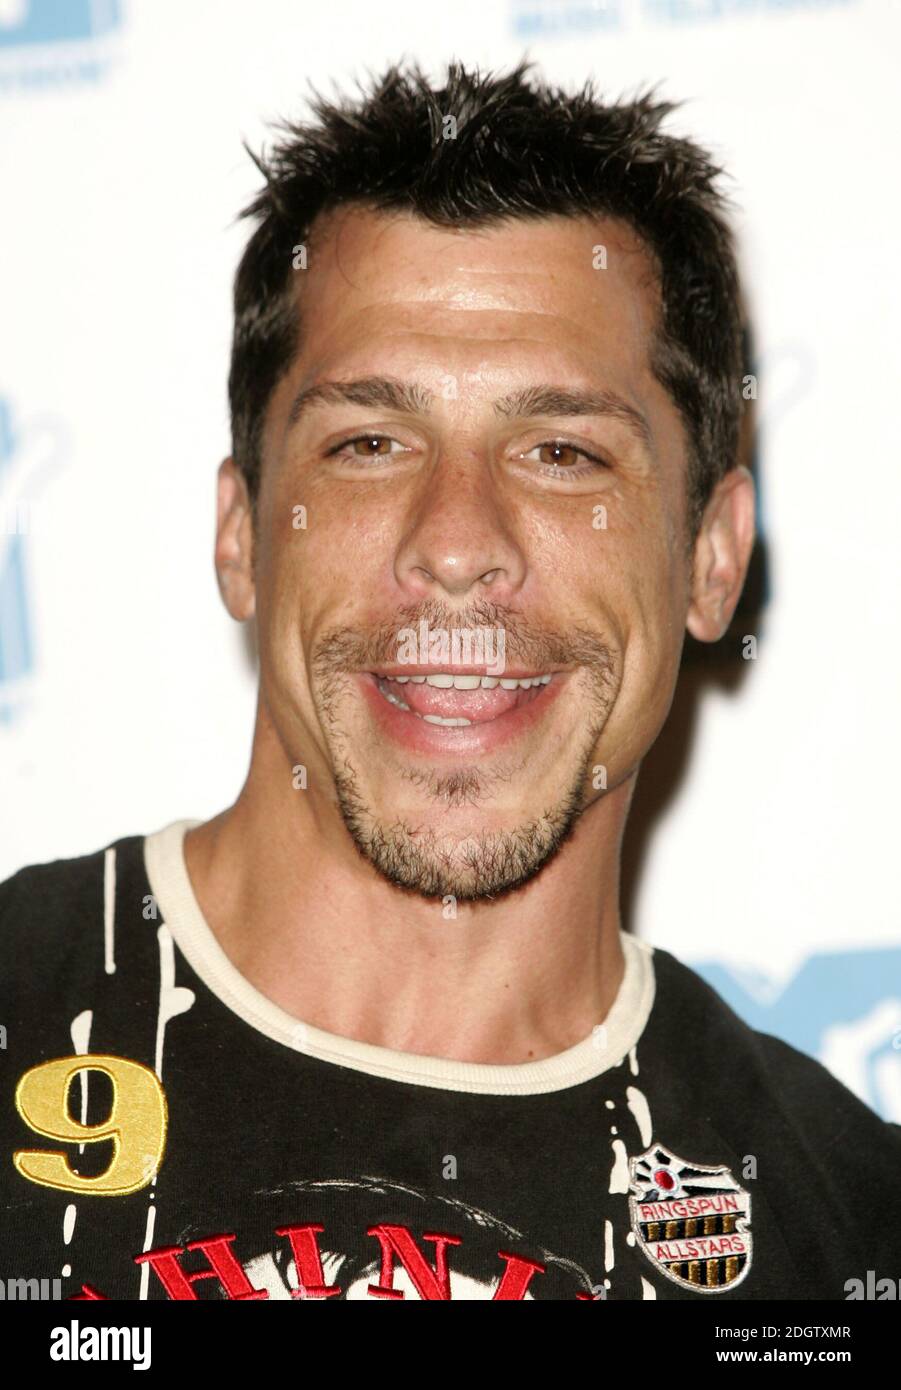 Danny Wood (New Kids On The Block) attending. Stock Photo